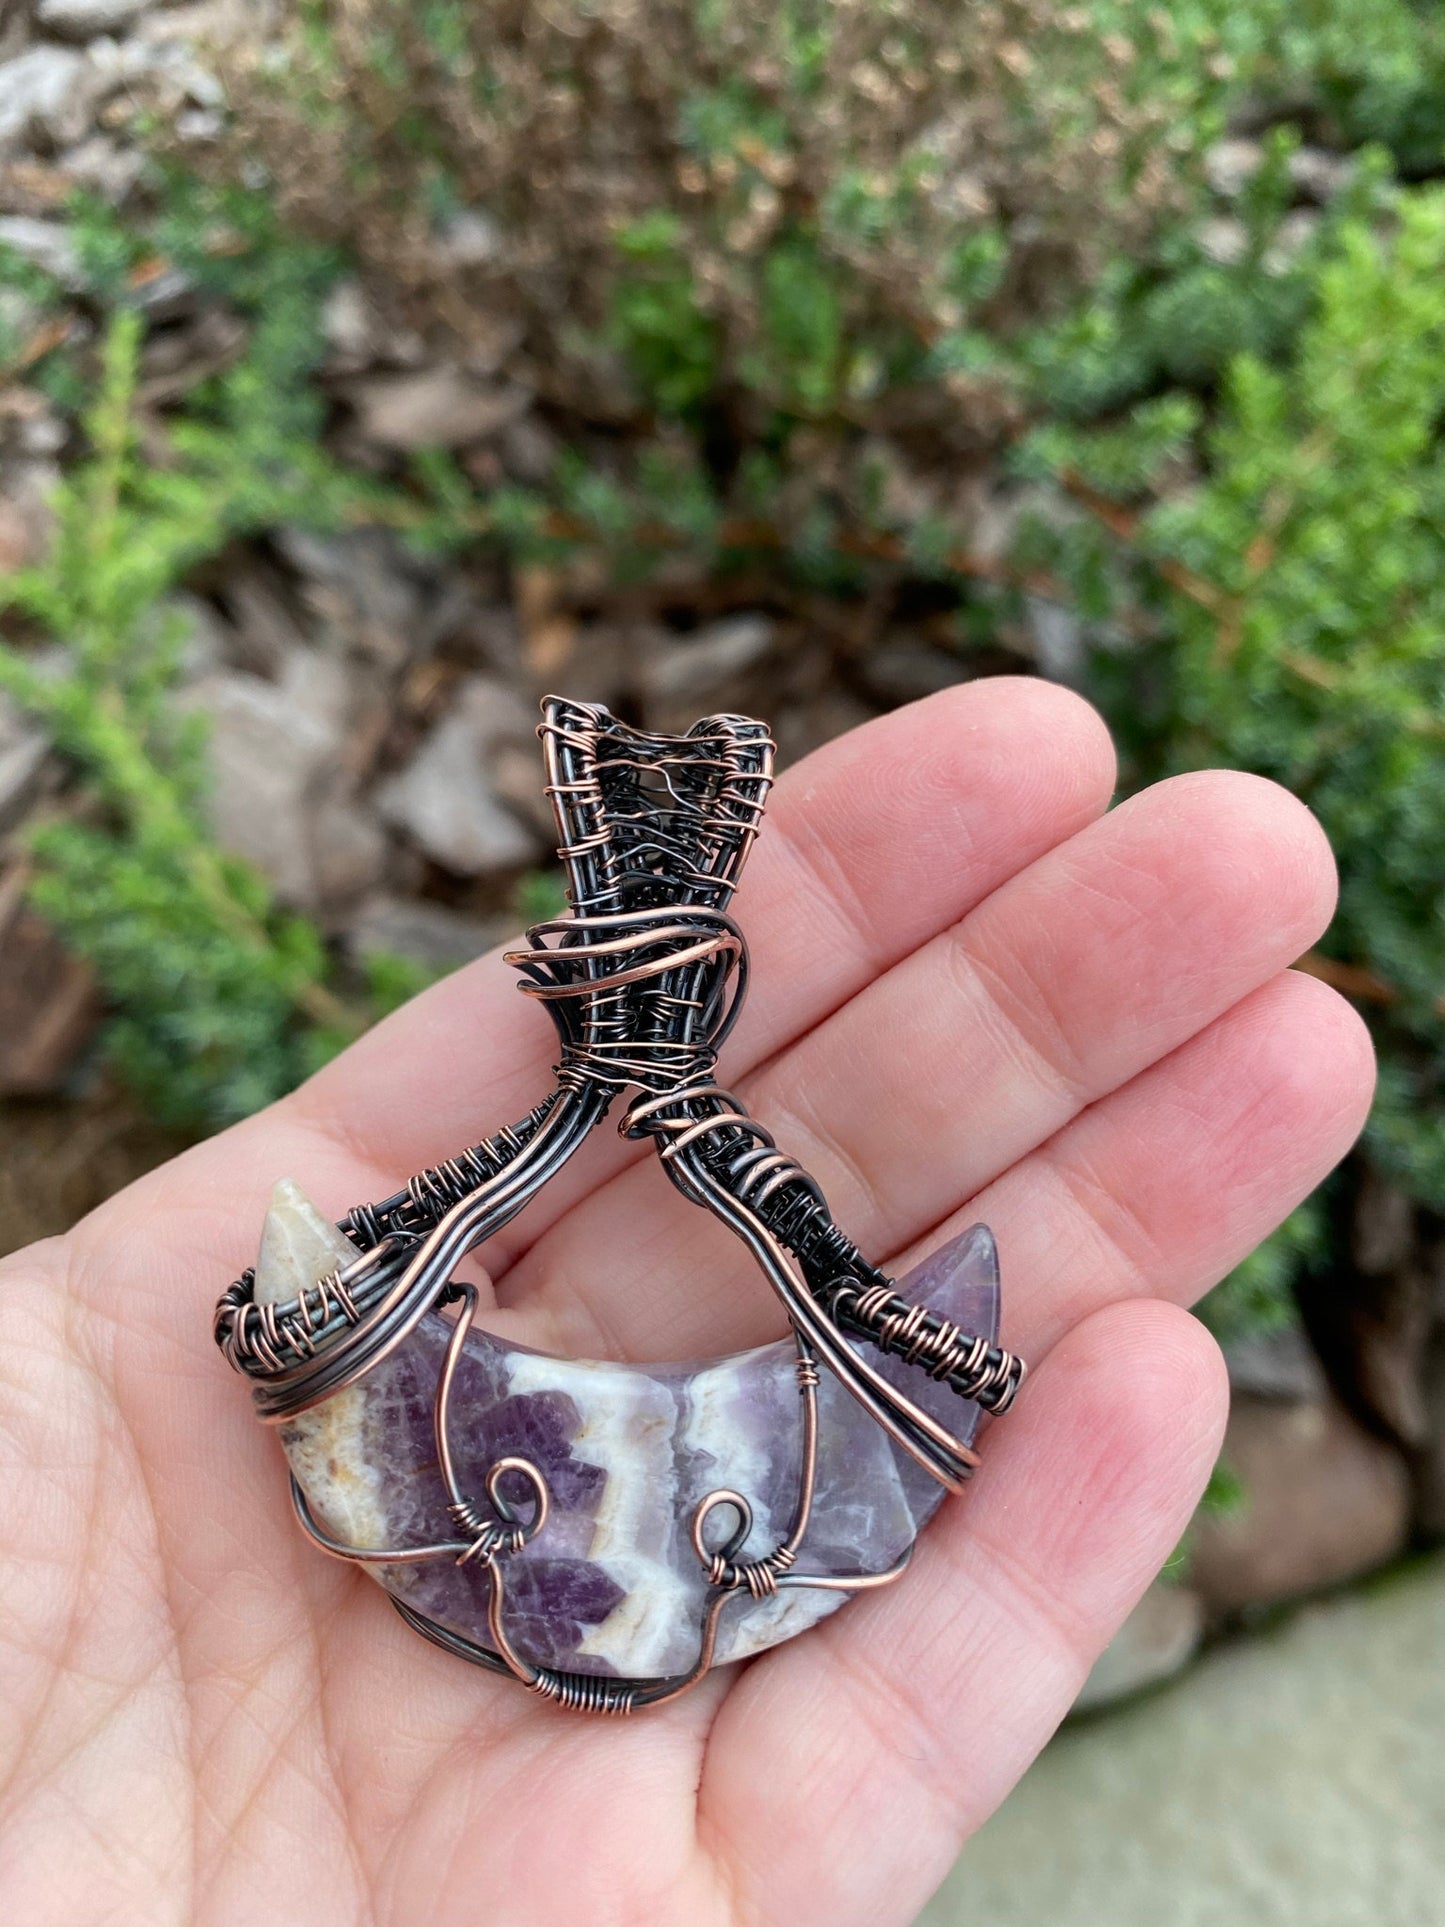 Striking Moon Shaped Quartz Pendant Wire Wrapped In Copper Wire